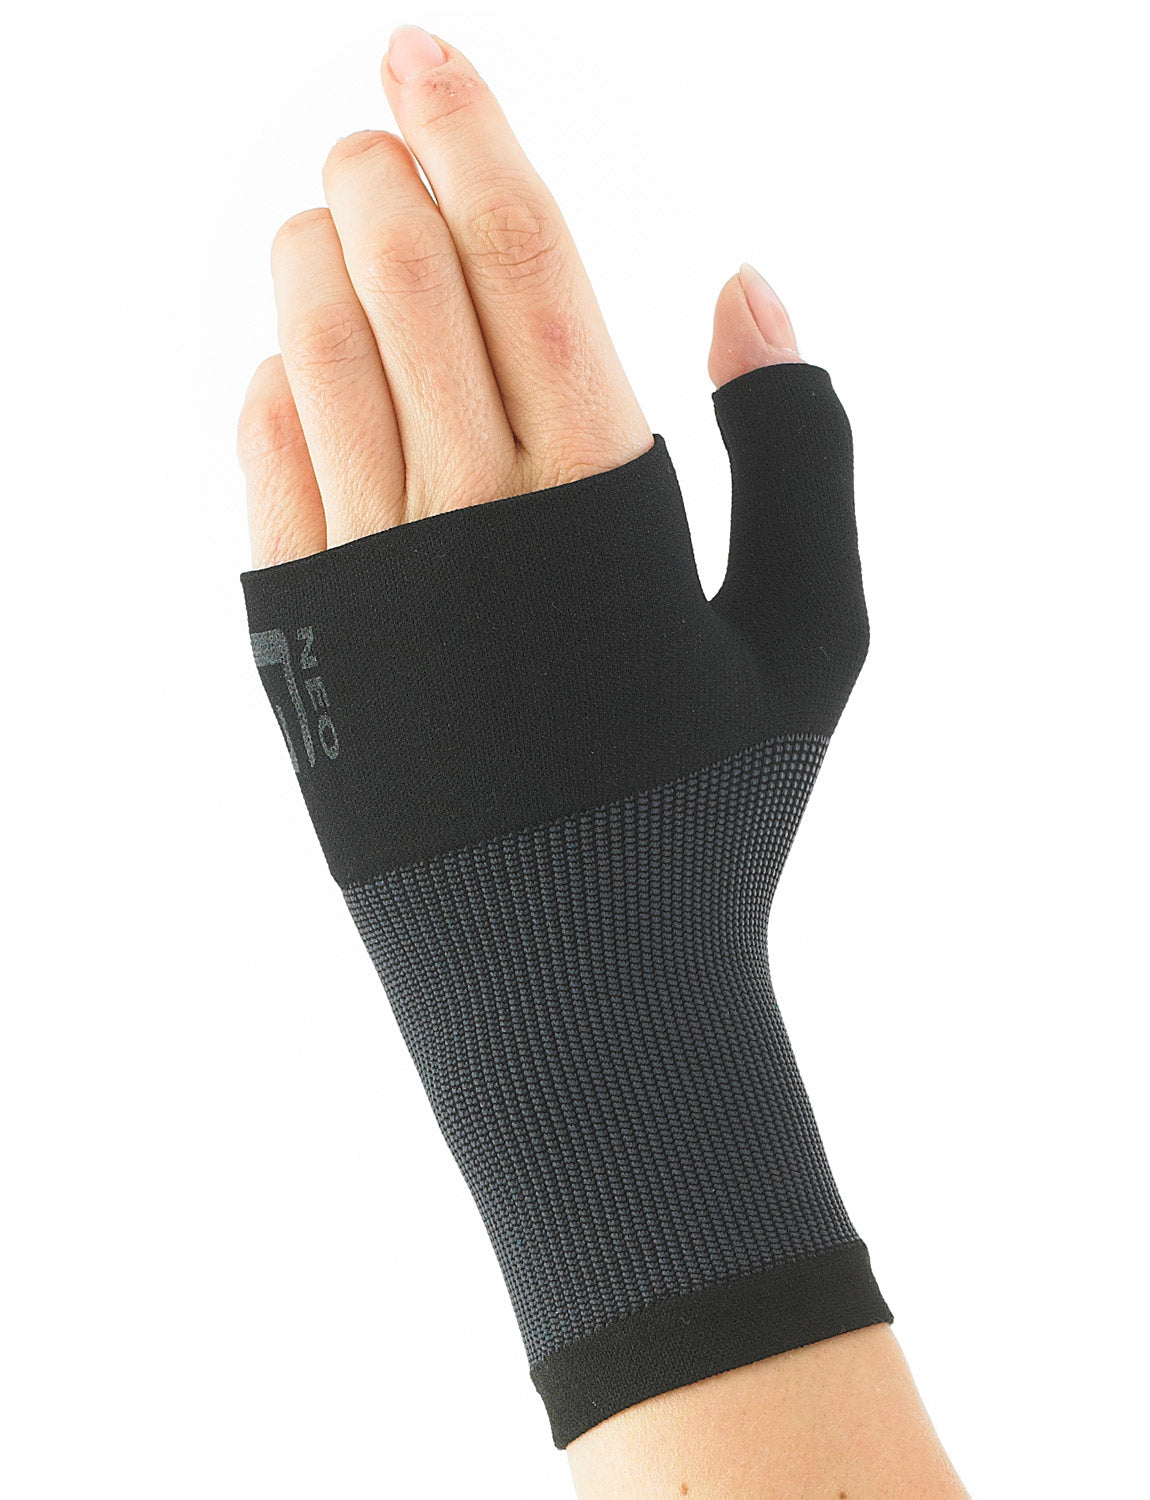  Neo-G Wrist Brace for arthritis pain and support - for